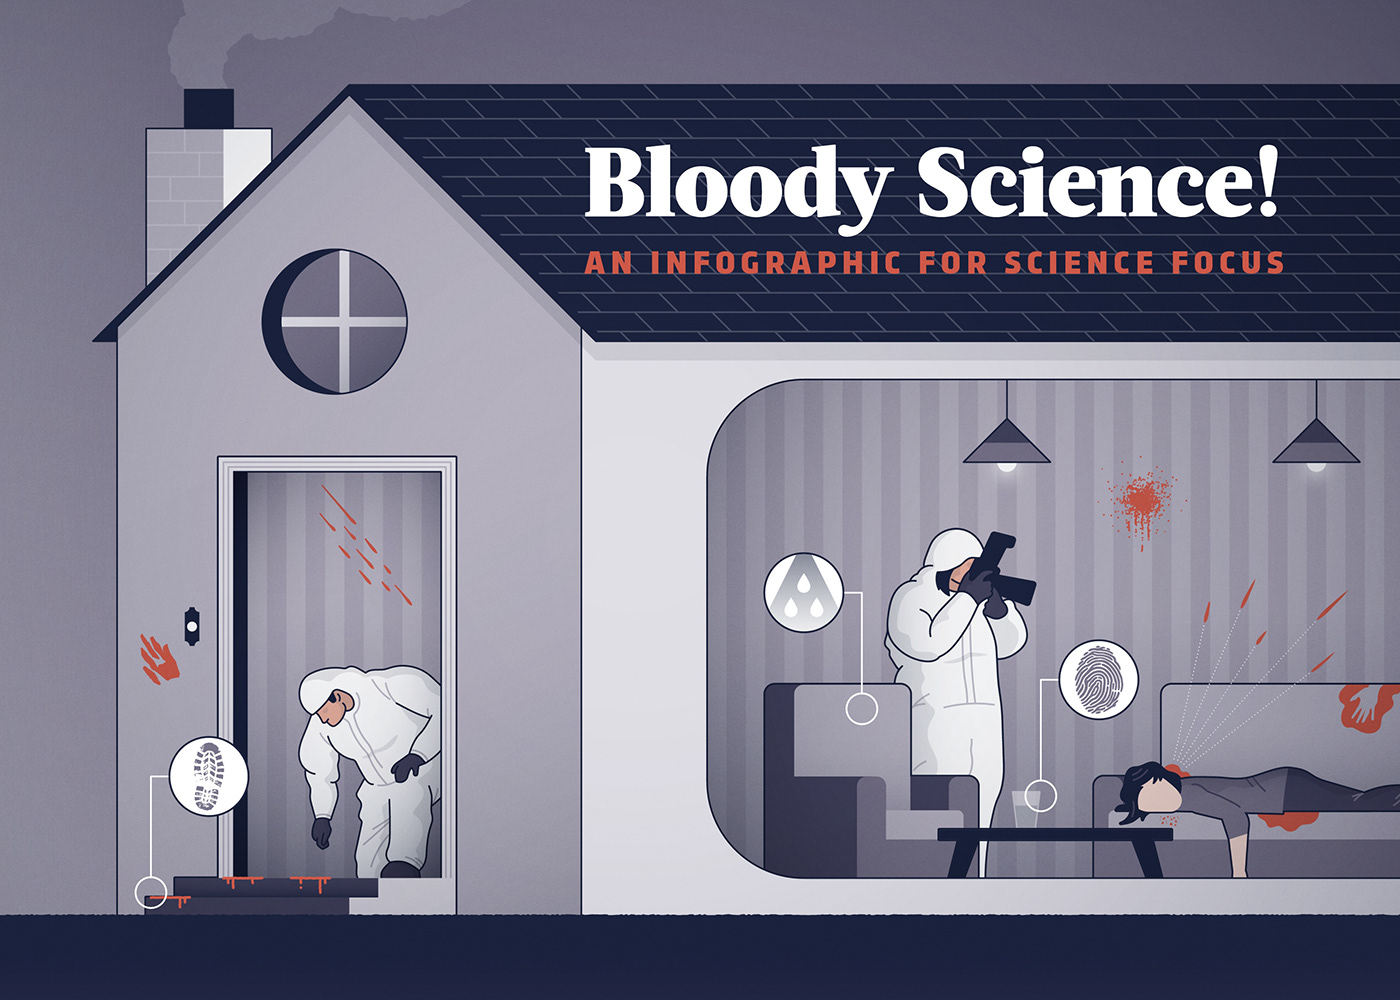 magazine infographic science blood crime police Data information design editorial Layout